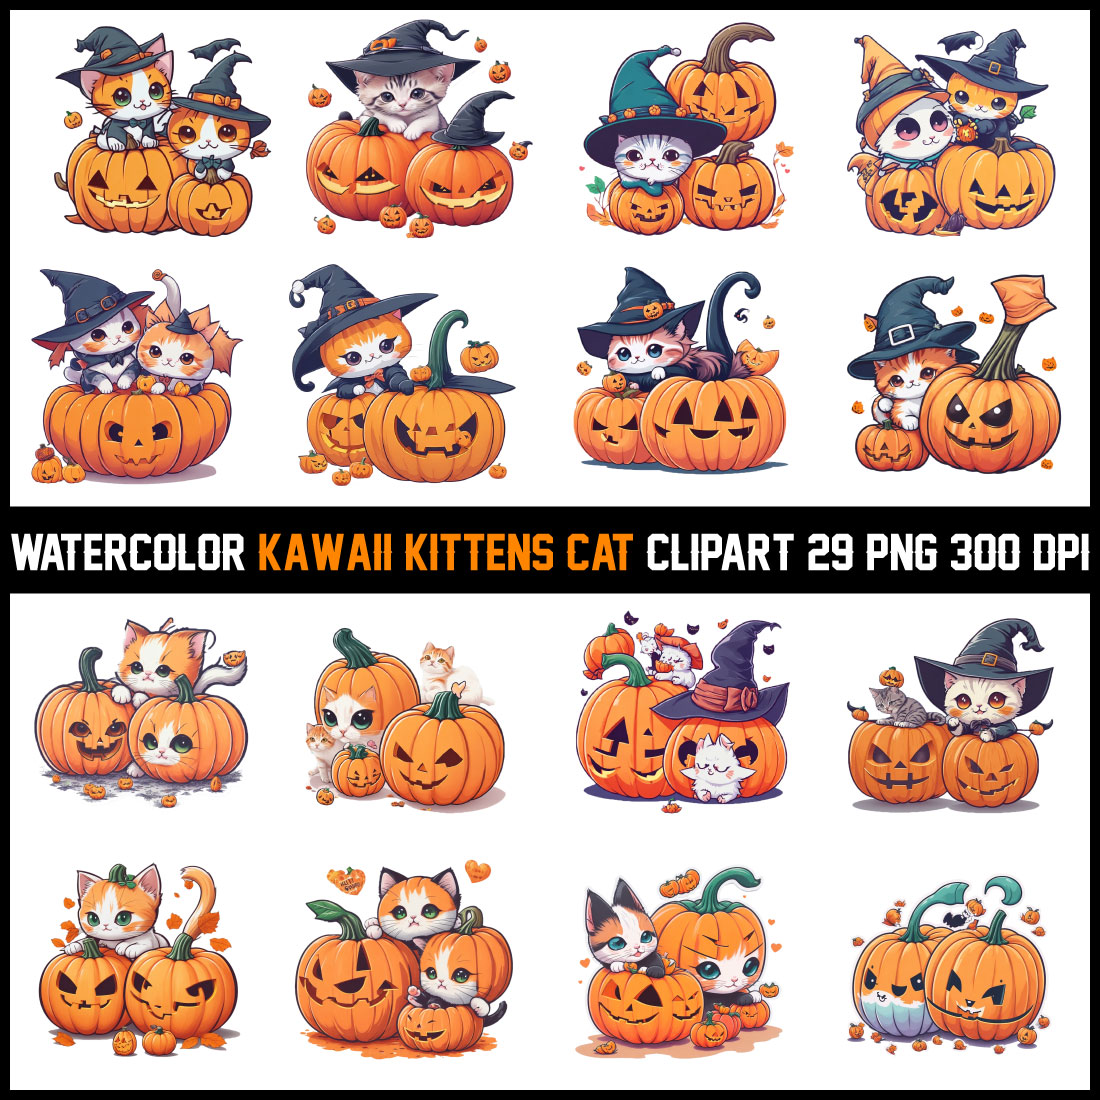 Watercolor anime cats clipart - cute kawaii kittens PNG